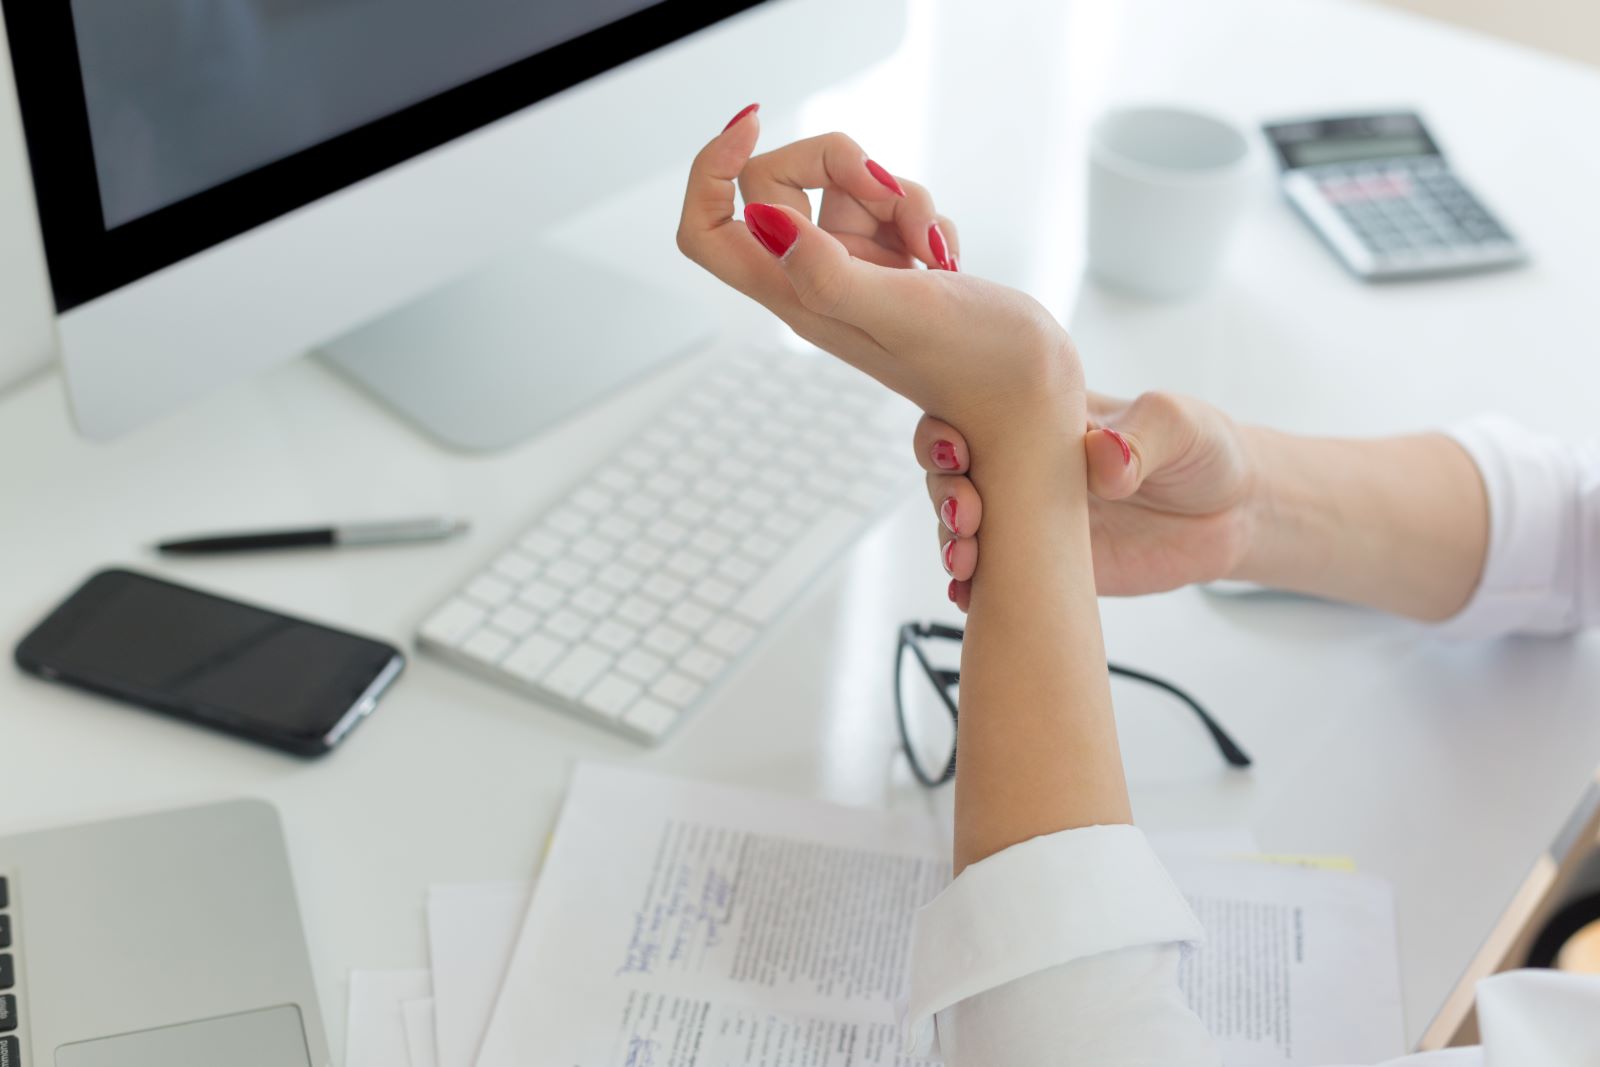 If you work at a desk, you’re prone to a hand or wrist injury like carpal tunnel. Here’s when to get treated.